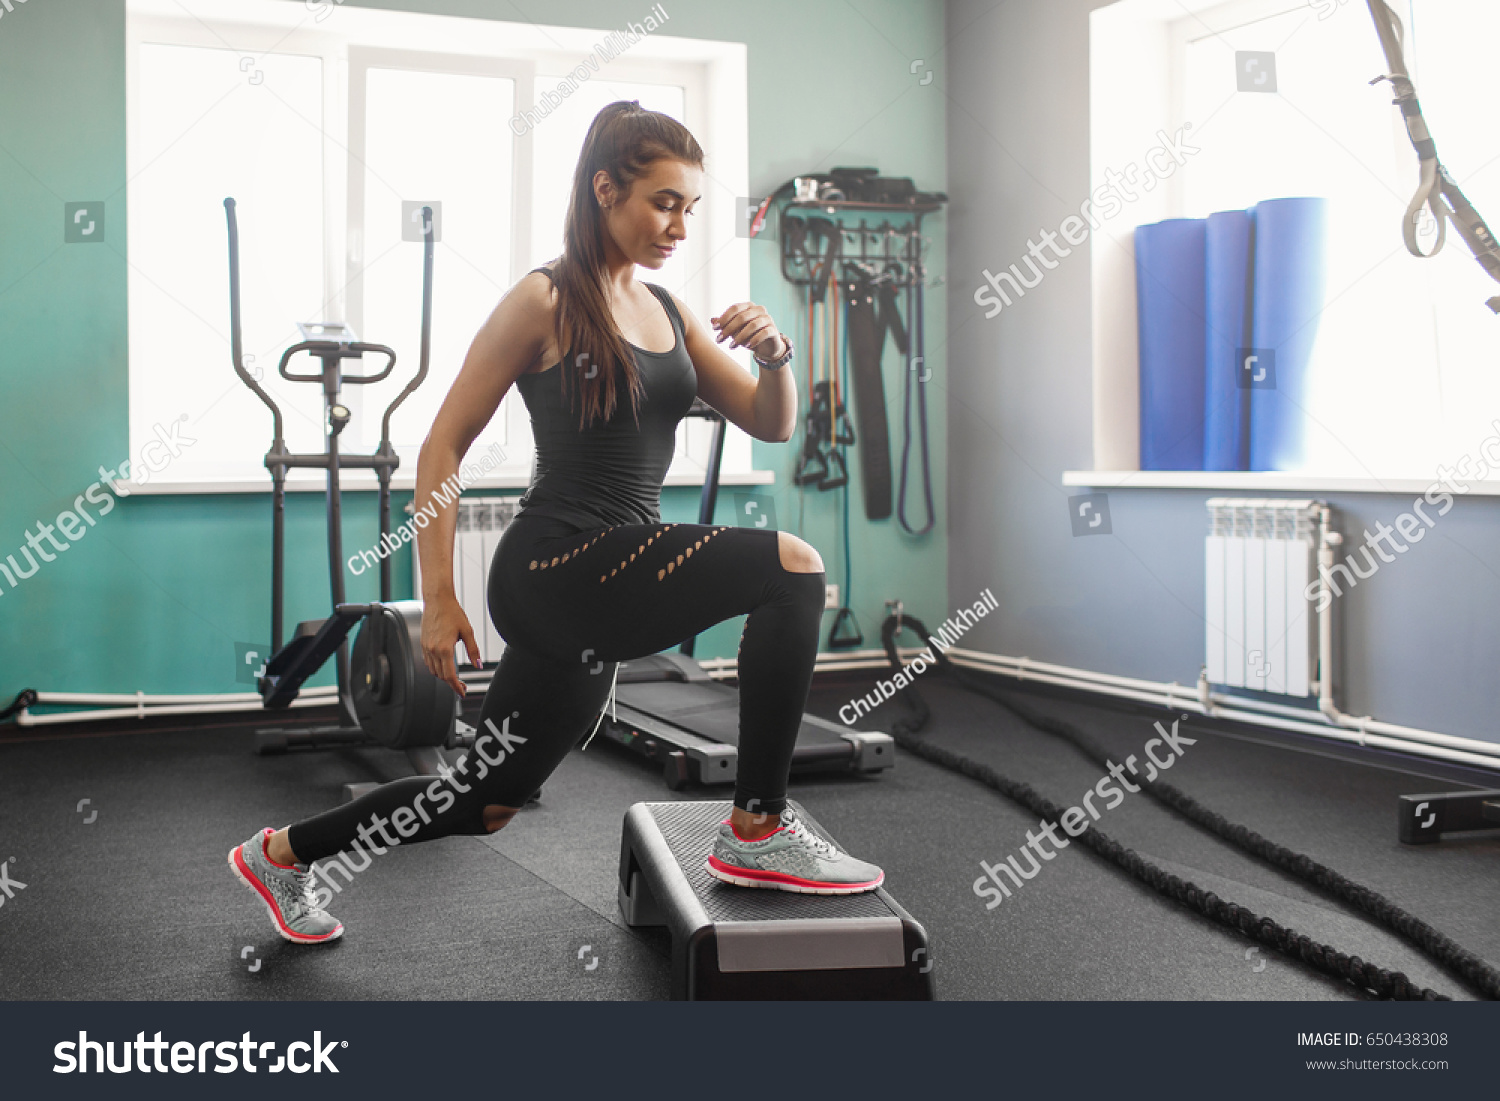 young fitness woman in the gym. A young athlete trains in the gymnasium. Power training. A warm-up in the gym. #650438308